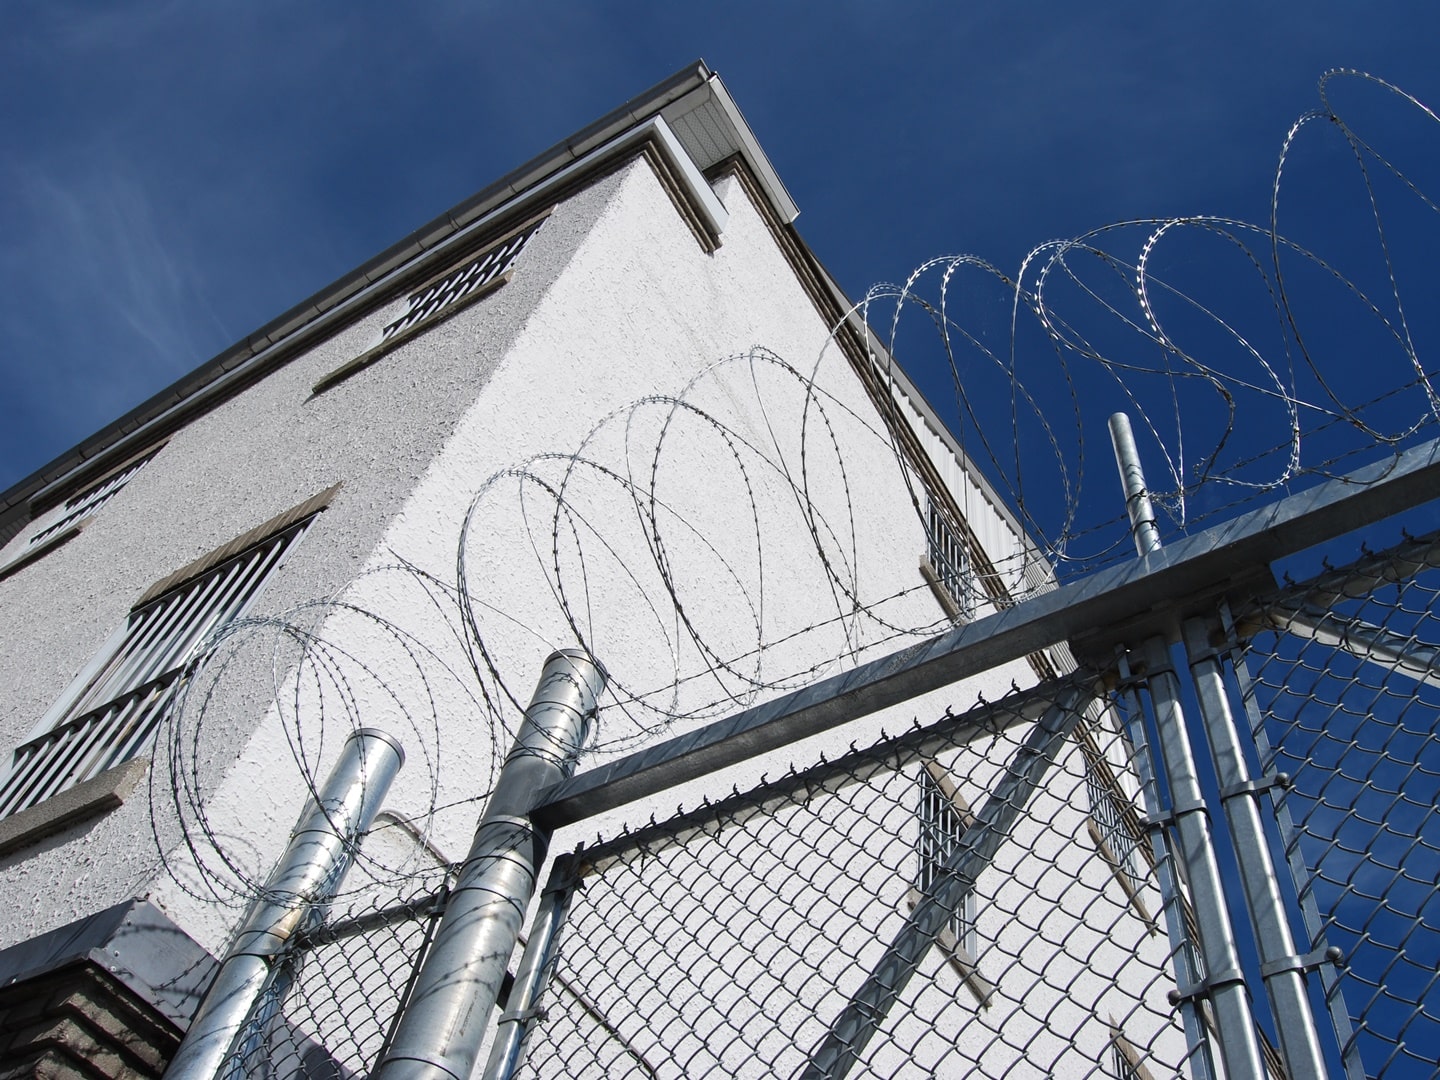 high prison wall with barbed wire fencing